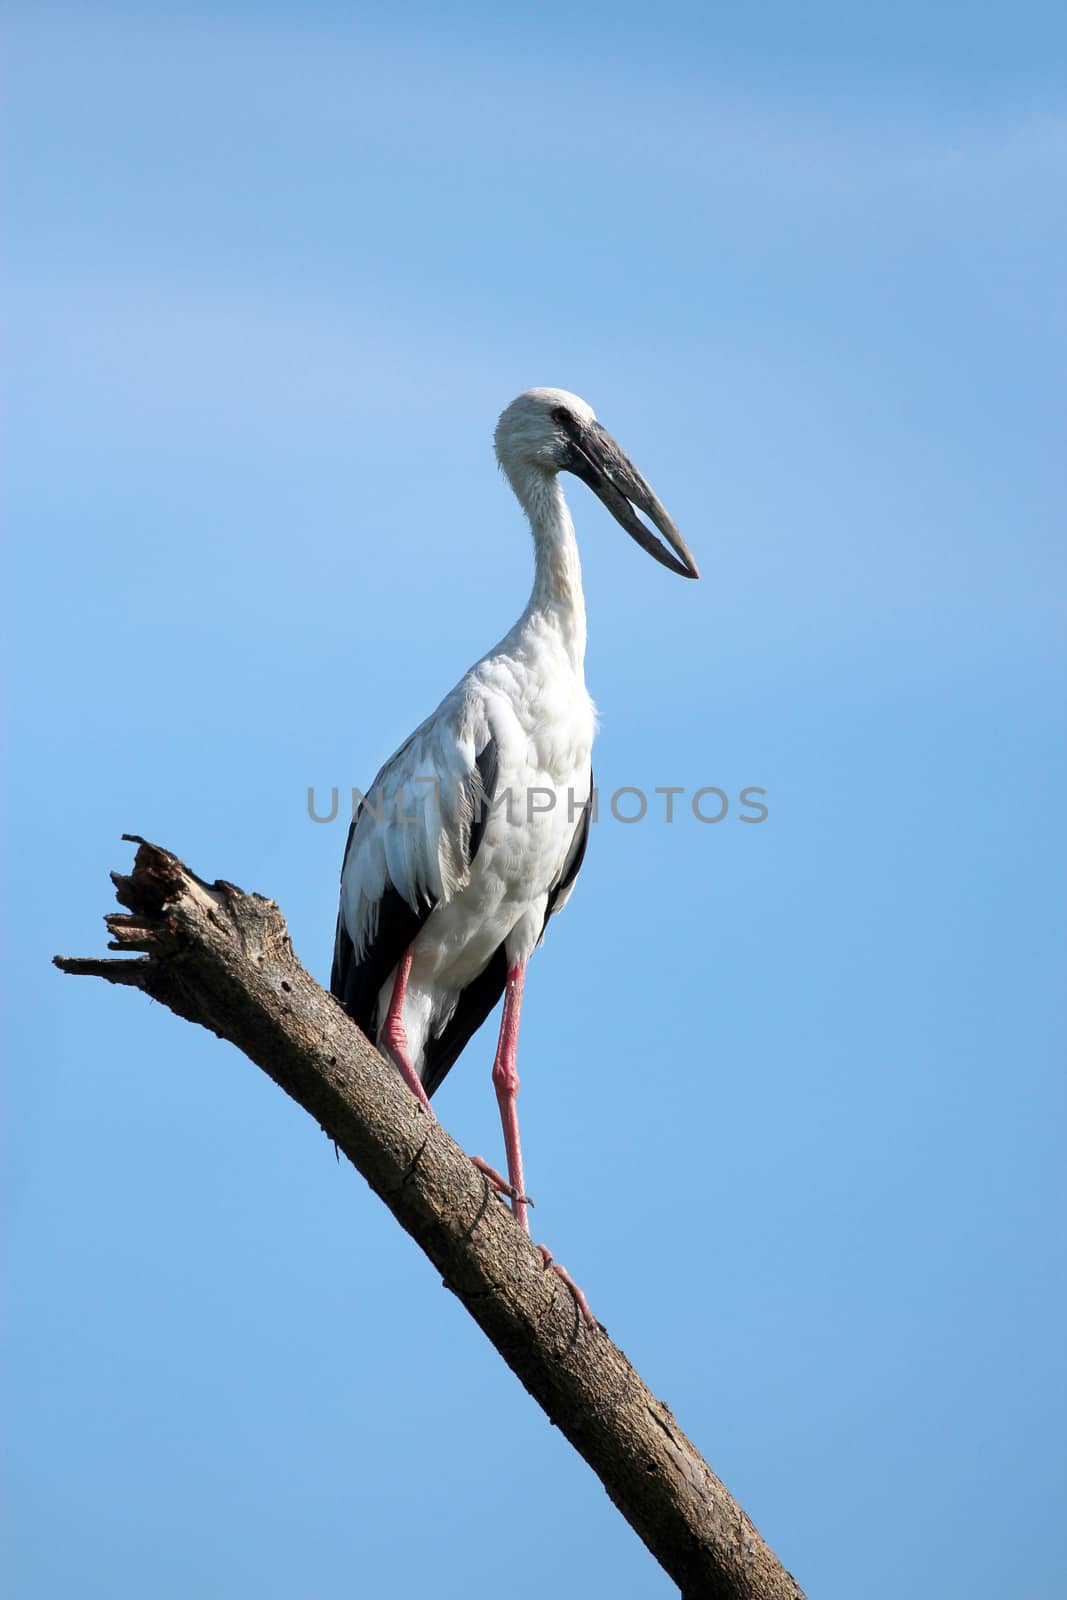 Image of stork perched on tree branch by yod67